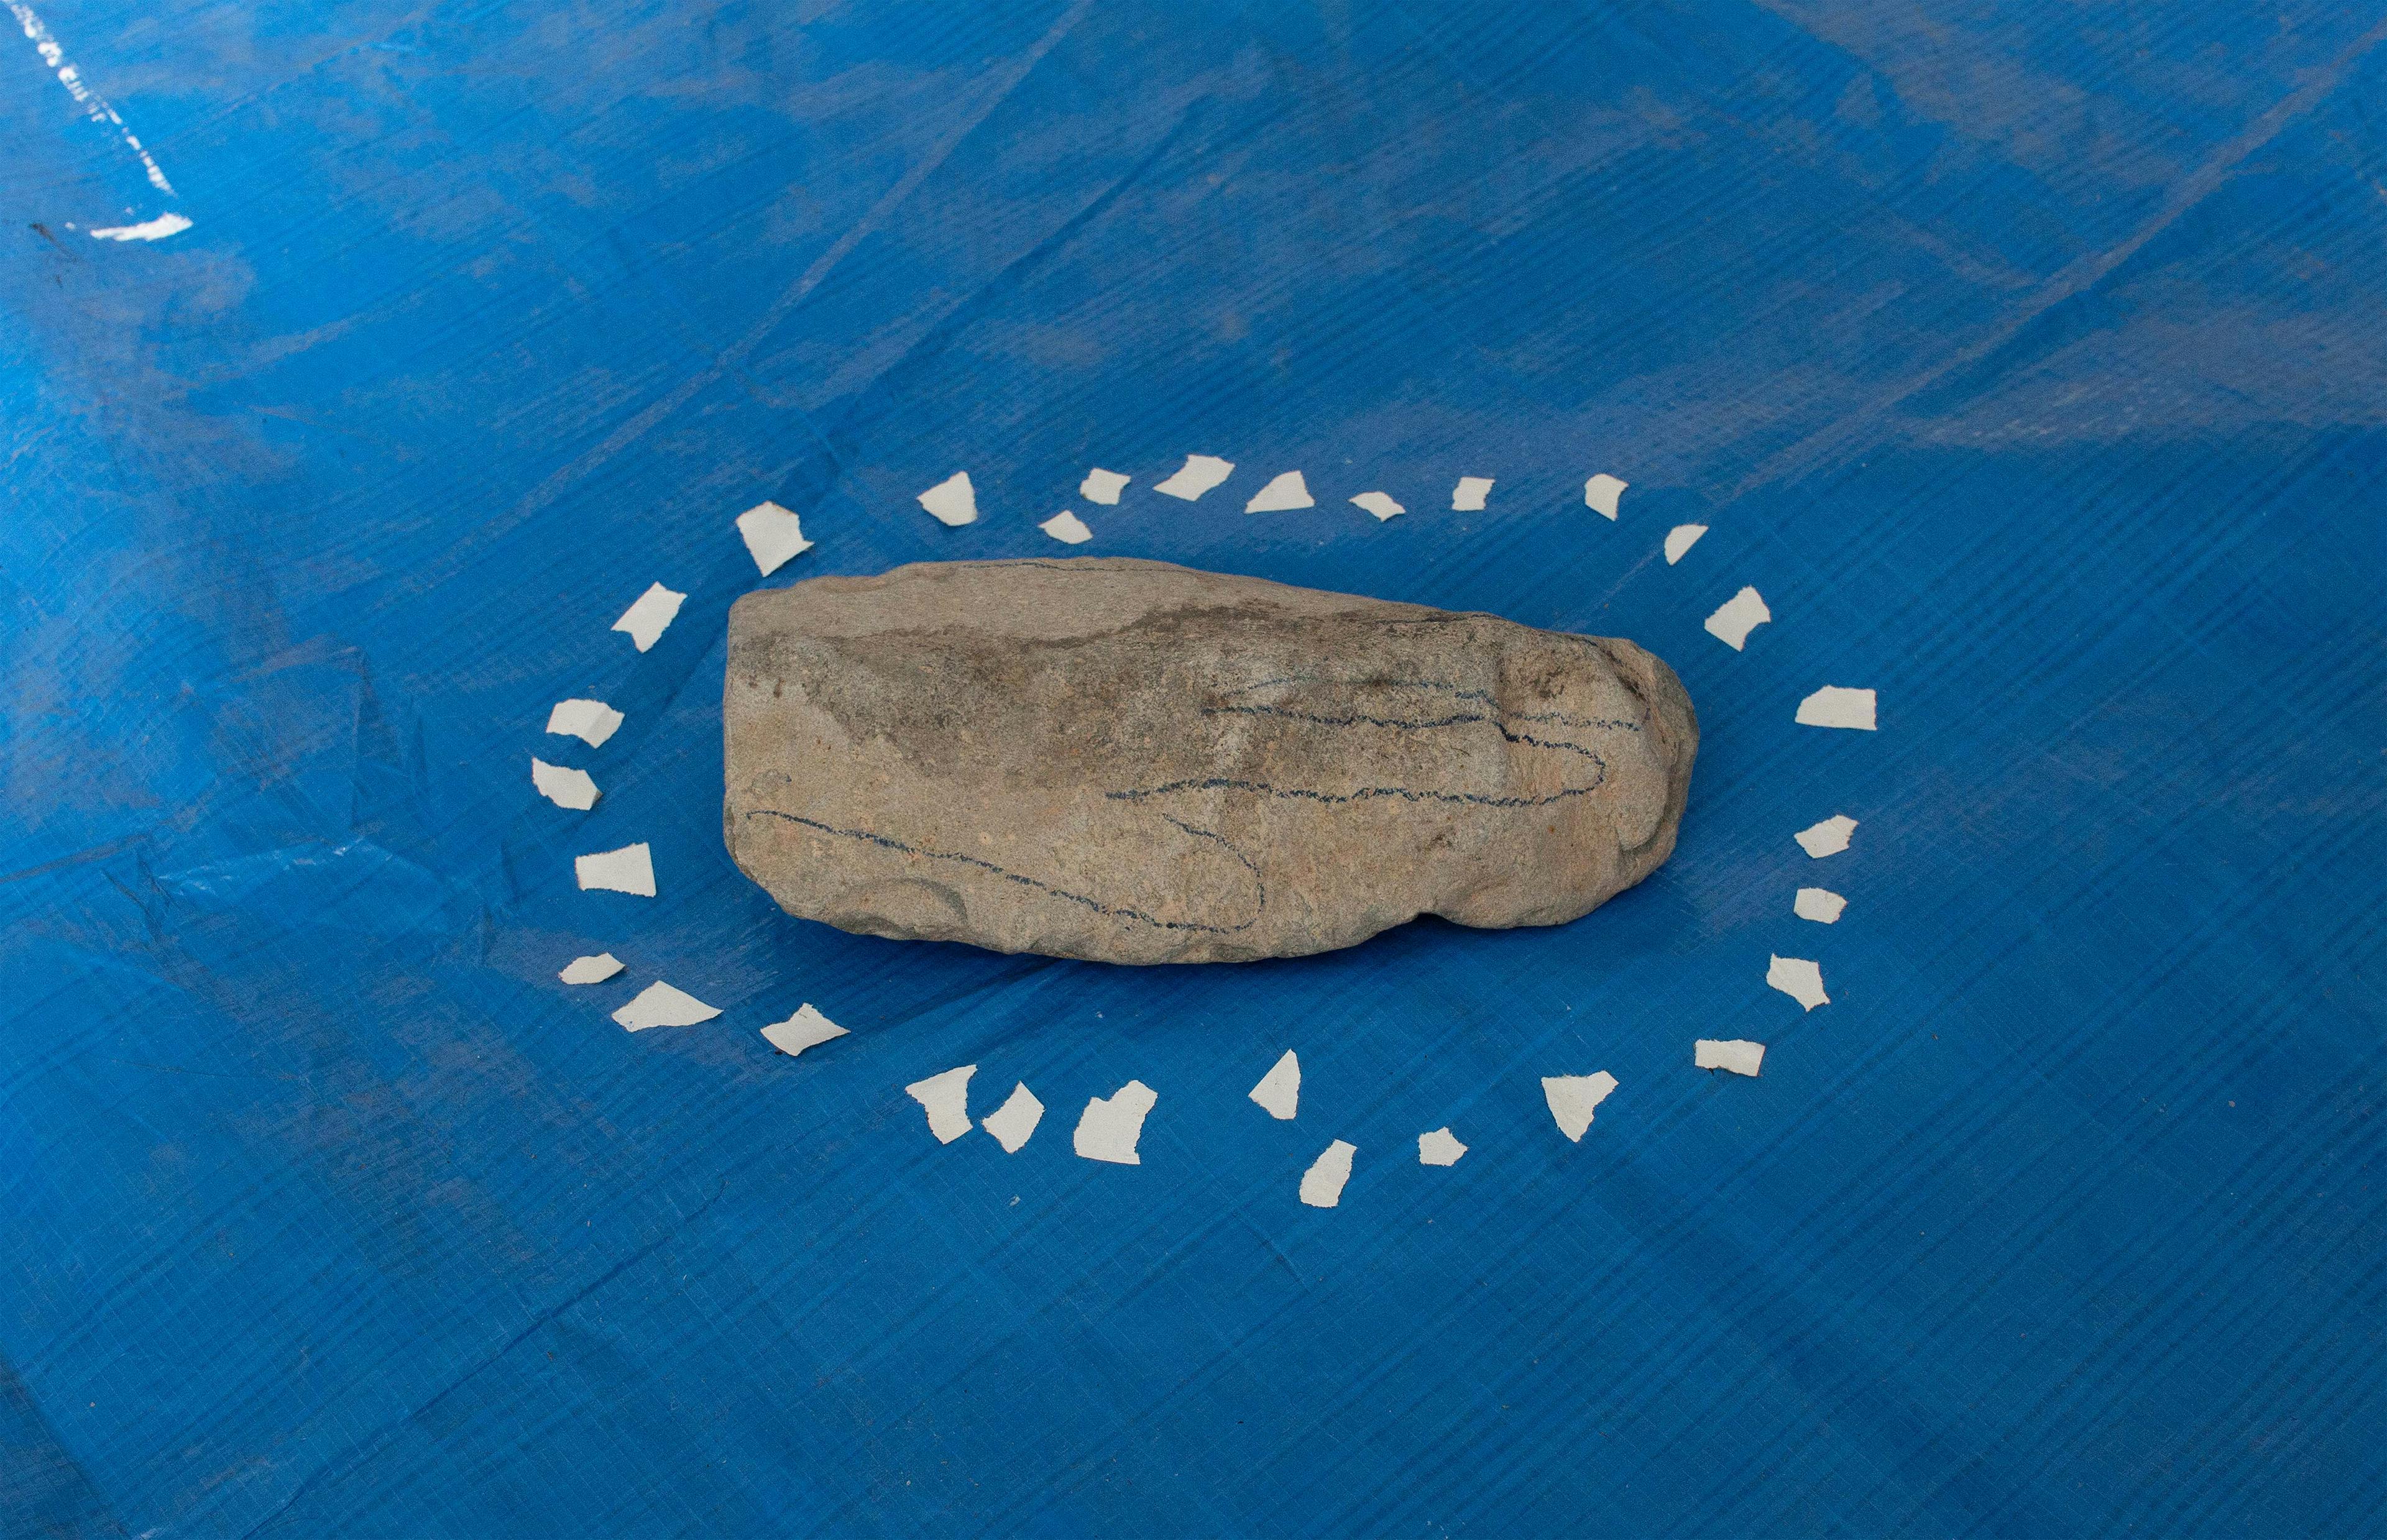 A stone with the outline of a handprint is displayed on a blue tarped surface.